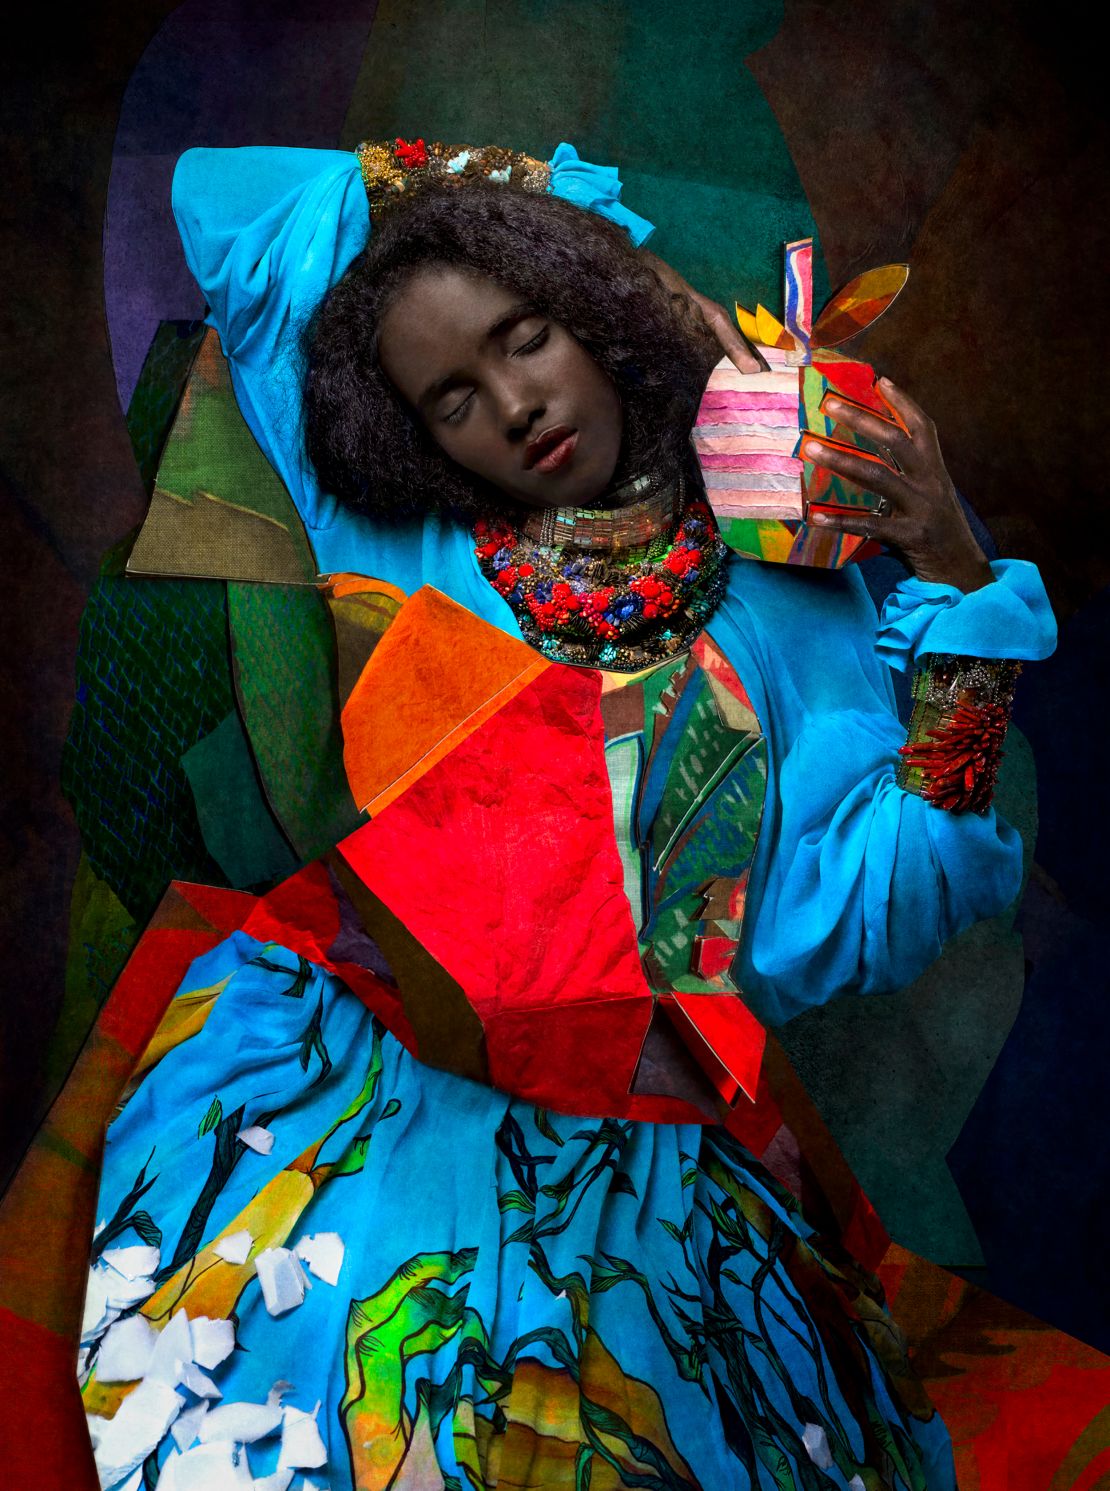 Maryan, originally from Kenya, in a shot from Cooper & Gorfer's new exhibition.